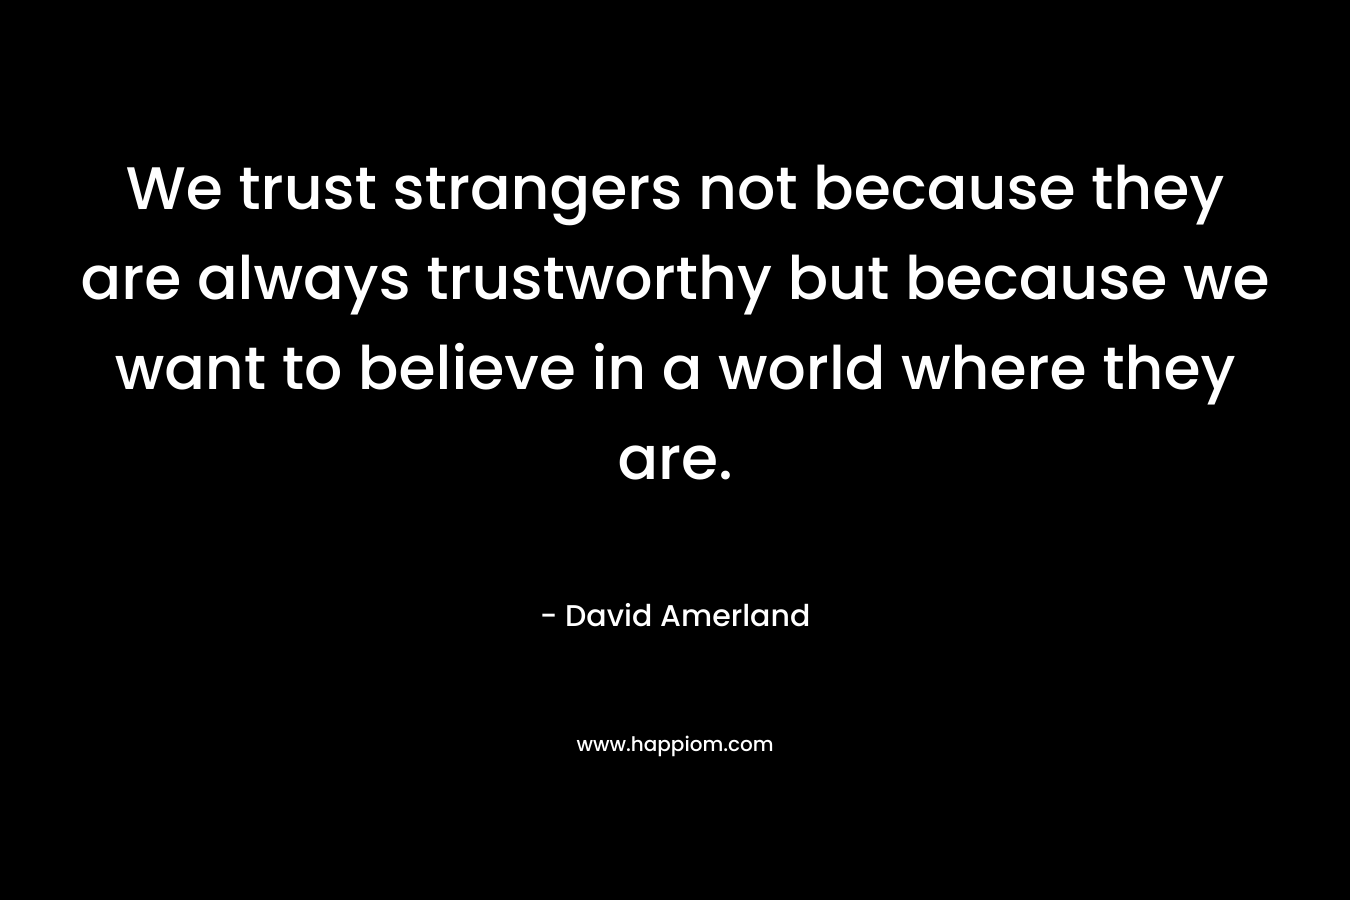 We trust strangers not because they are always trustworthy but because we want to believe in a world where they are.